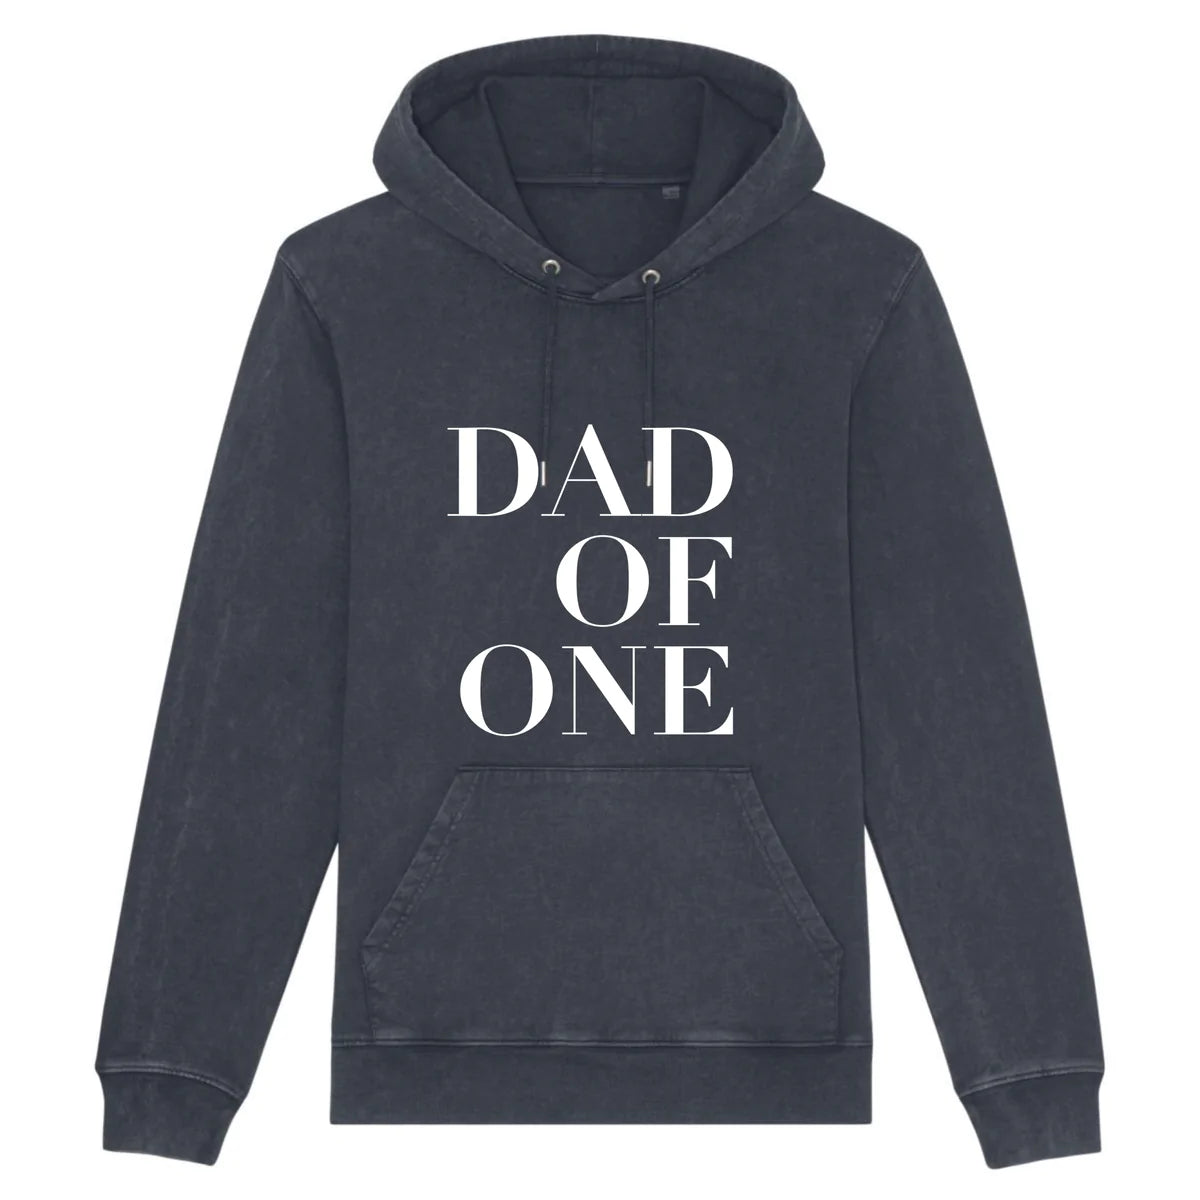 A HOODIE GRIS ANTHRACITE DAD OF ONE